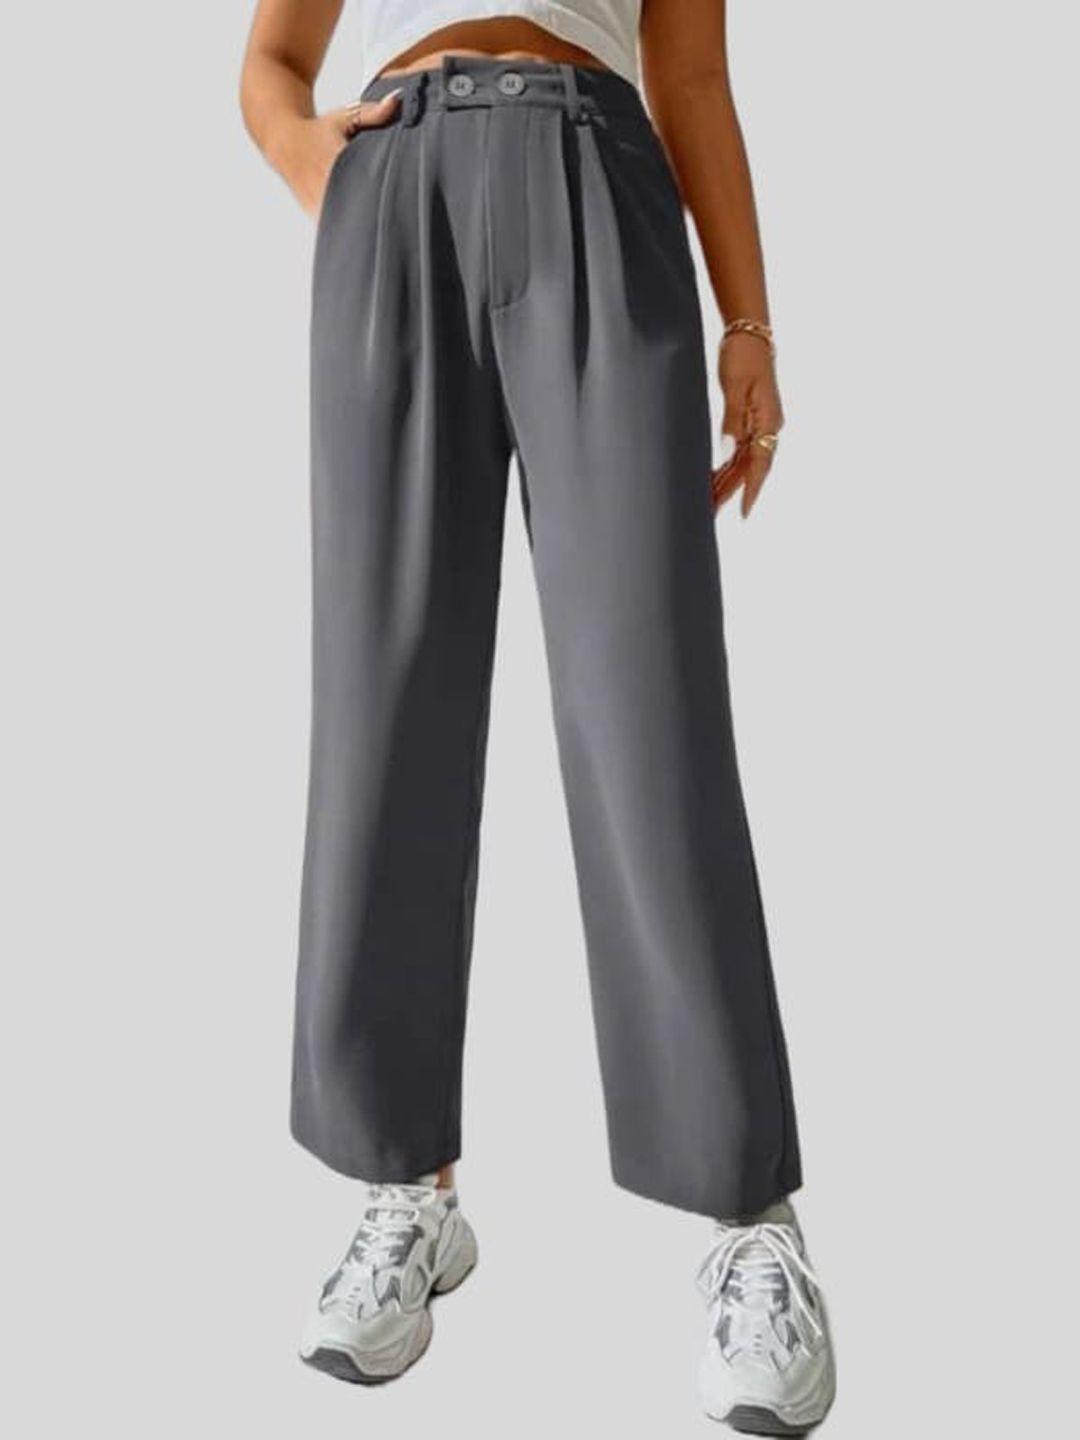 fnocks women comfort pure cotton pleated parallel trousers